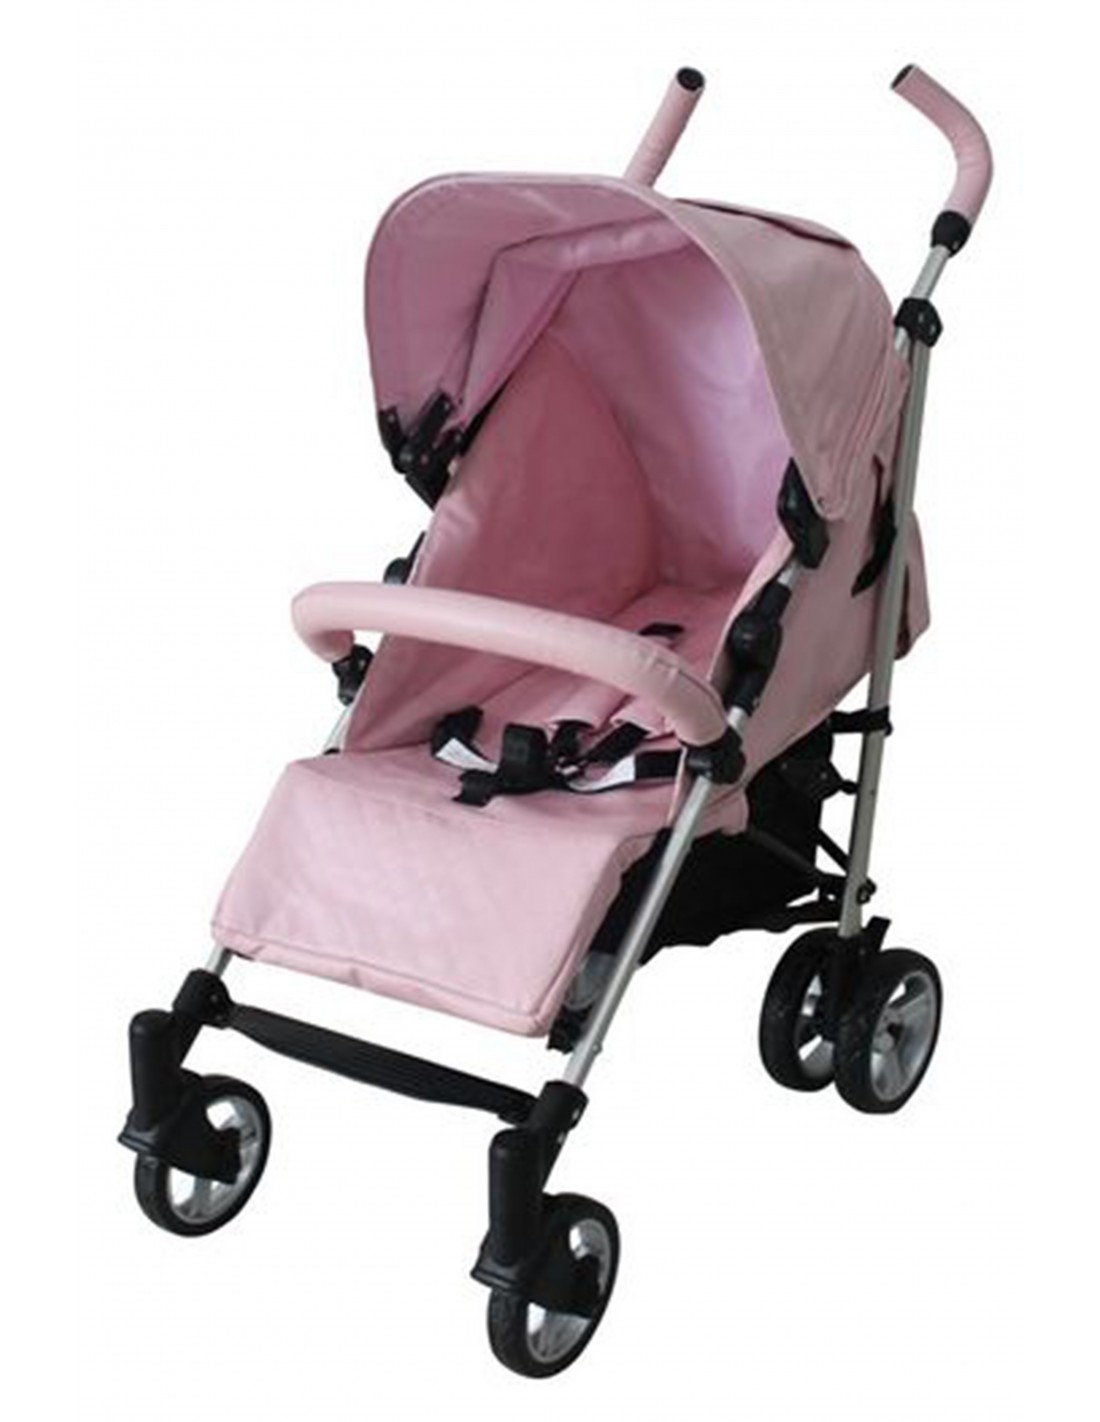 Massimo Leatherette Stroller Pram complete with Changing Bag & Footmuff